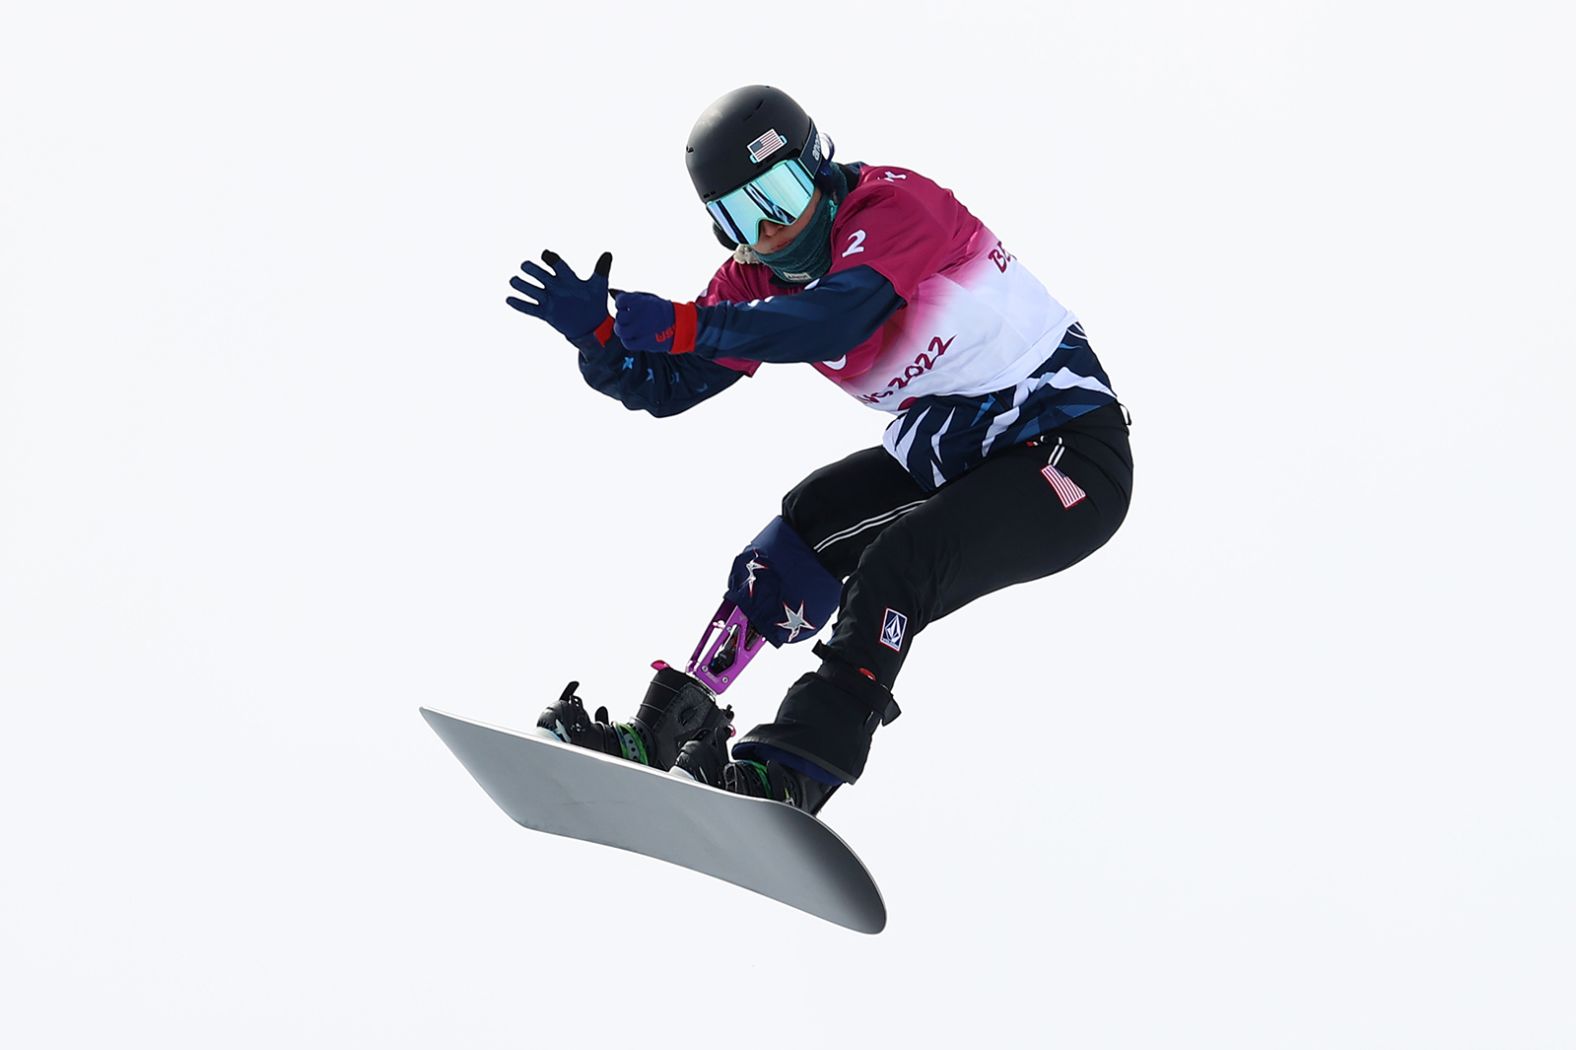 American snowboarder Brenna Huckaby takes part in a snowboard cross qualification race on March 6.